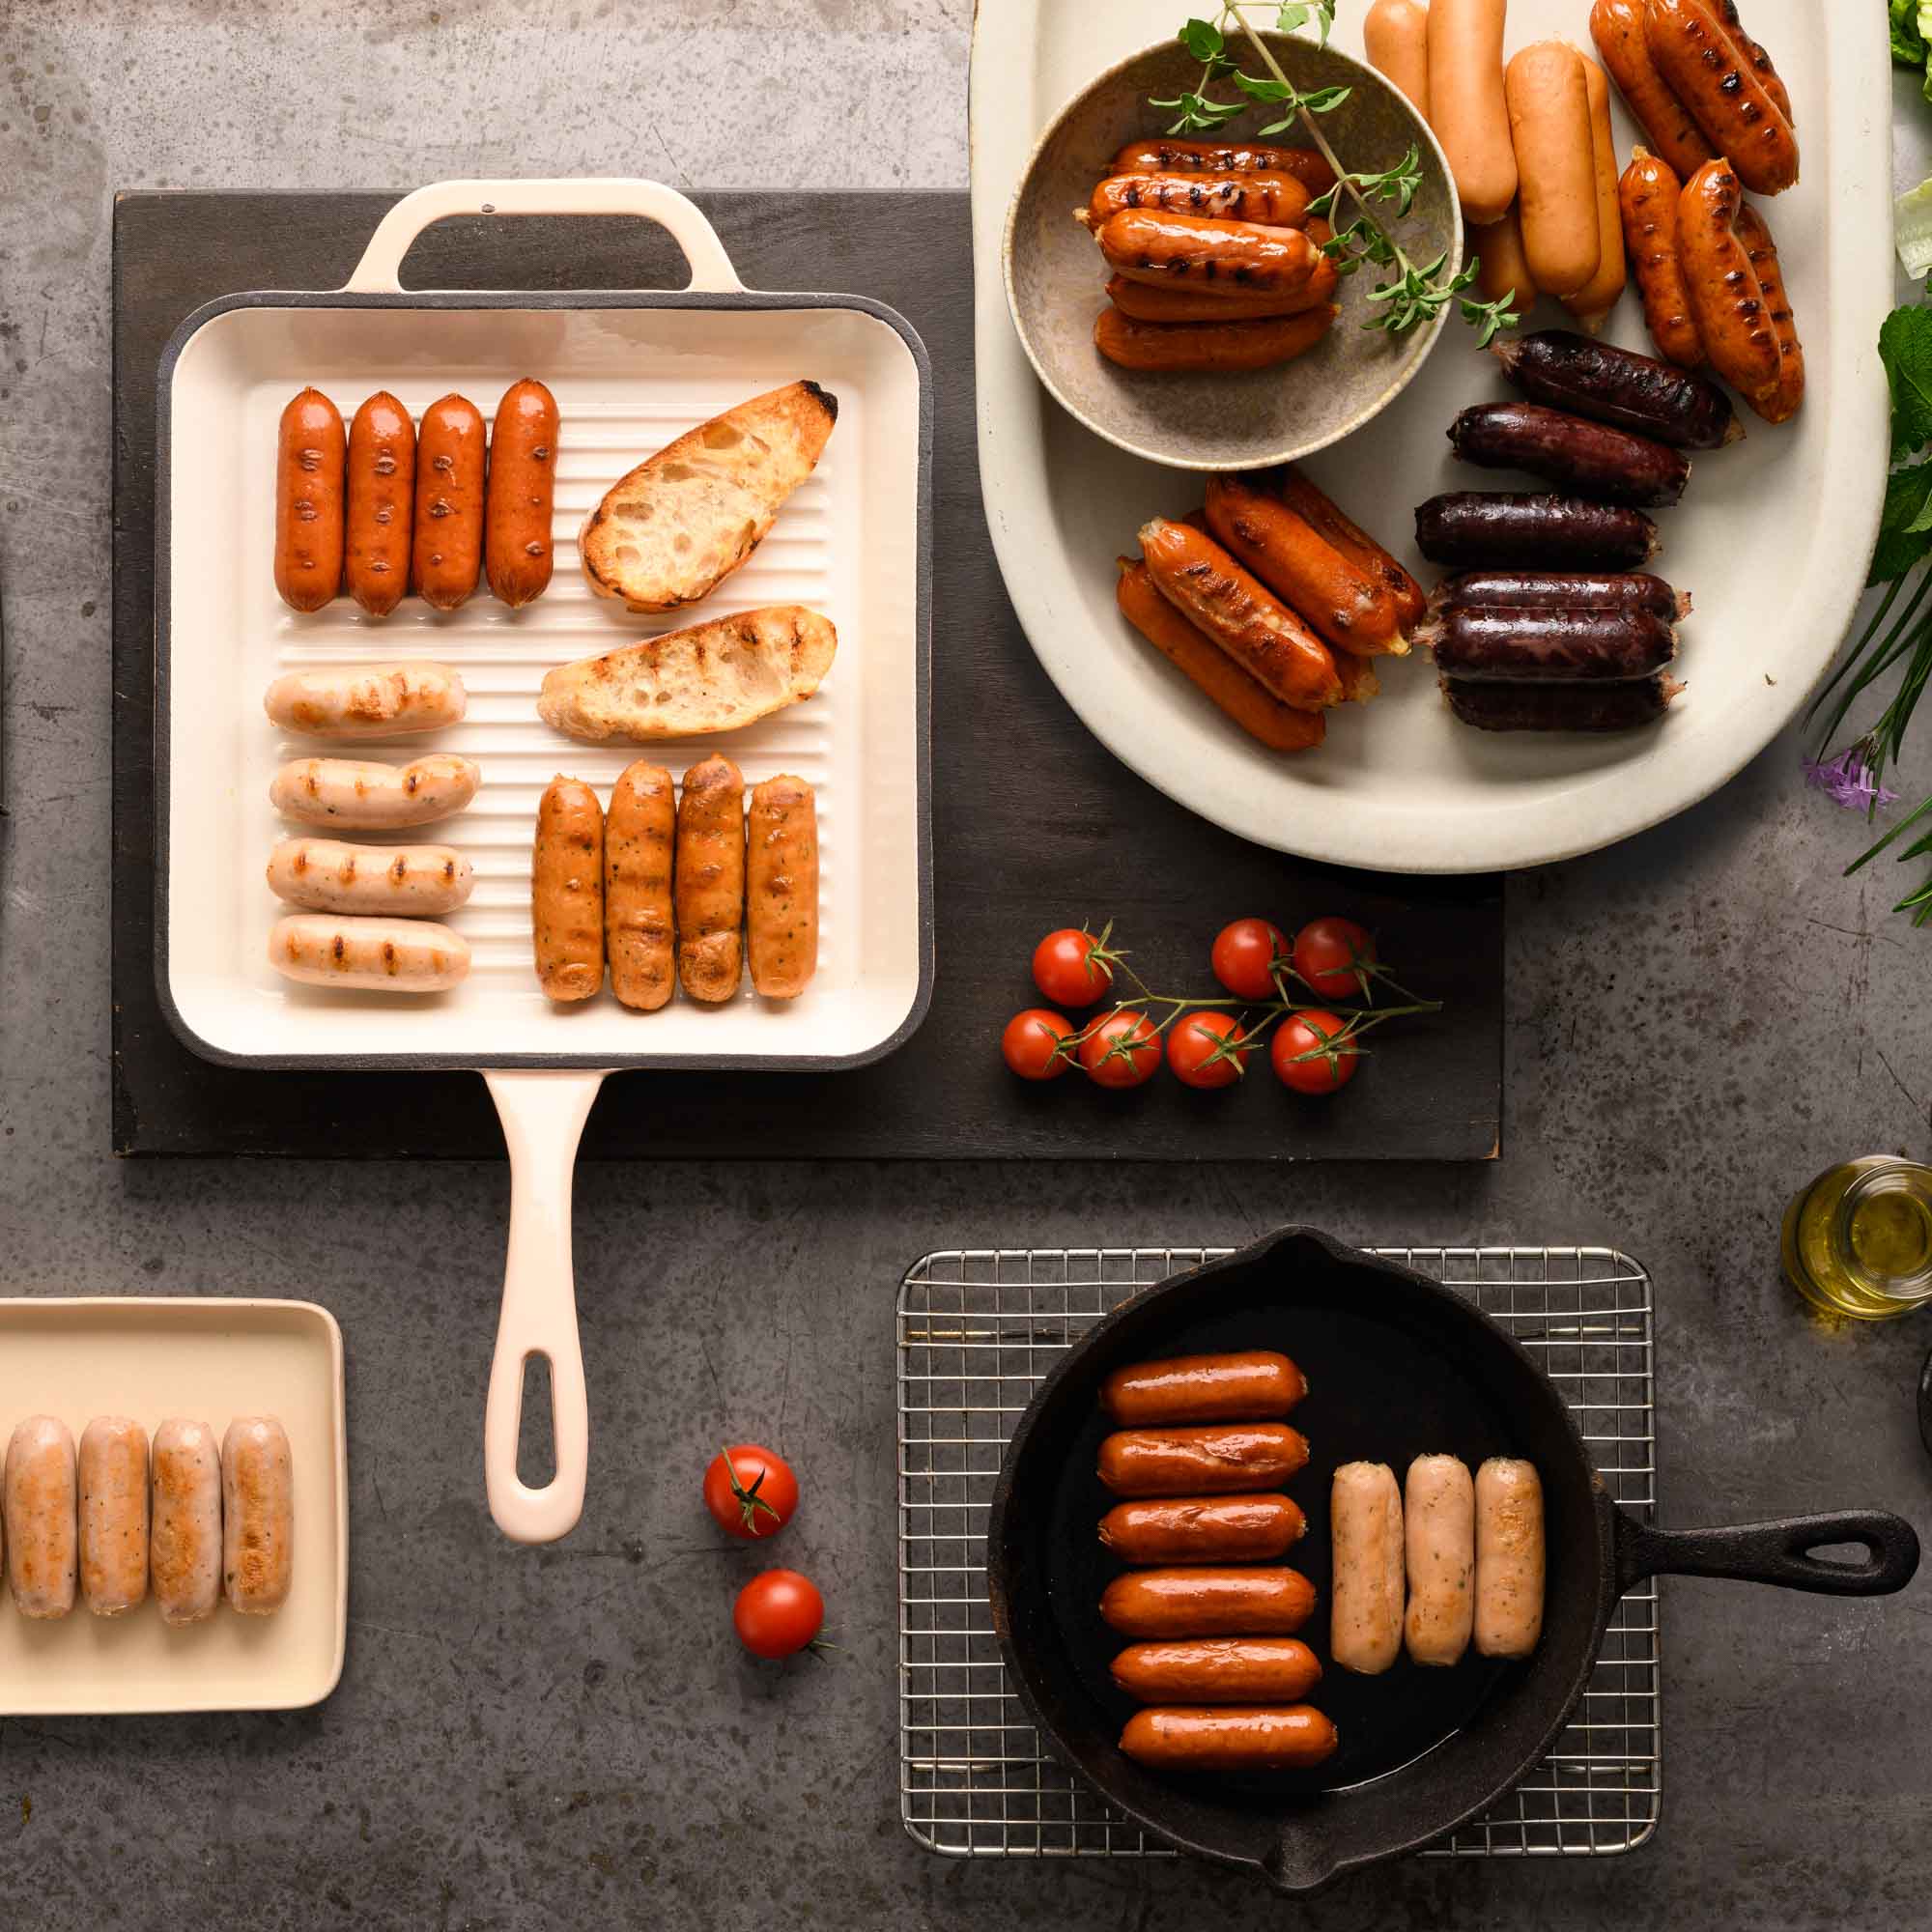 Gotzinger Smallgoods Chipolata Sausages in Pan with Breakfast Ingredients